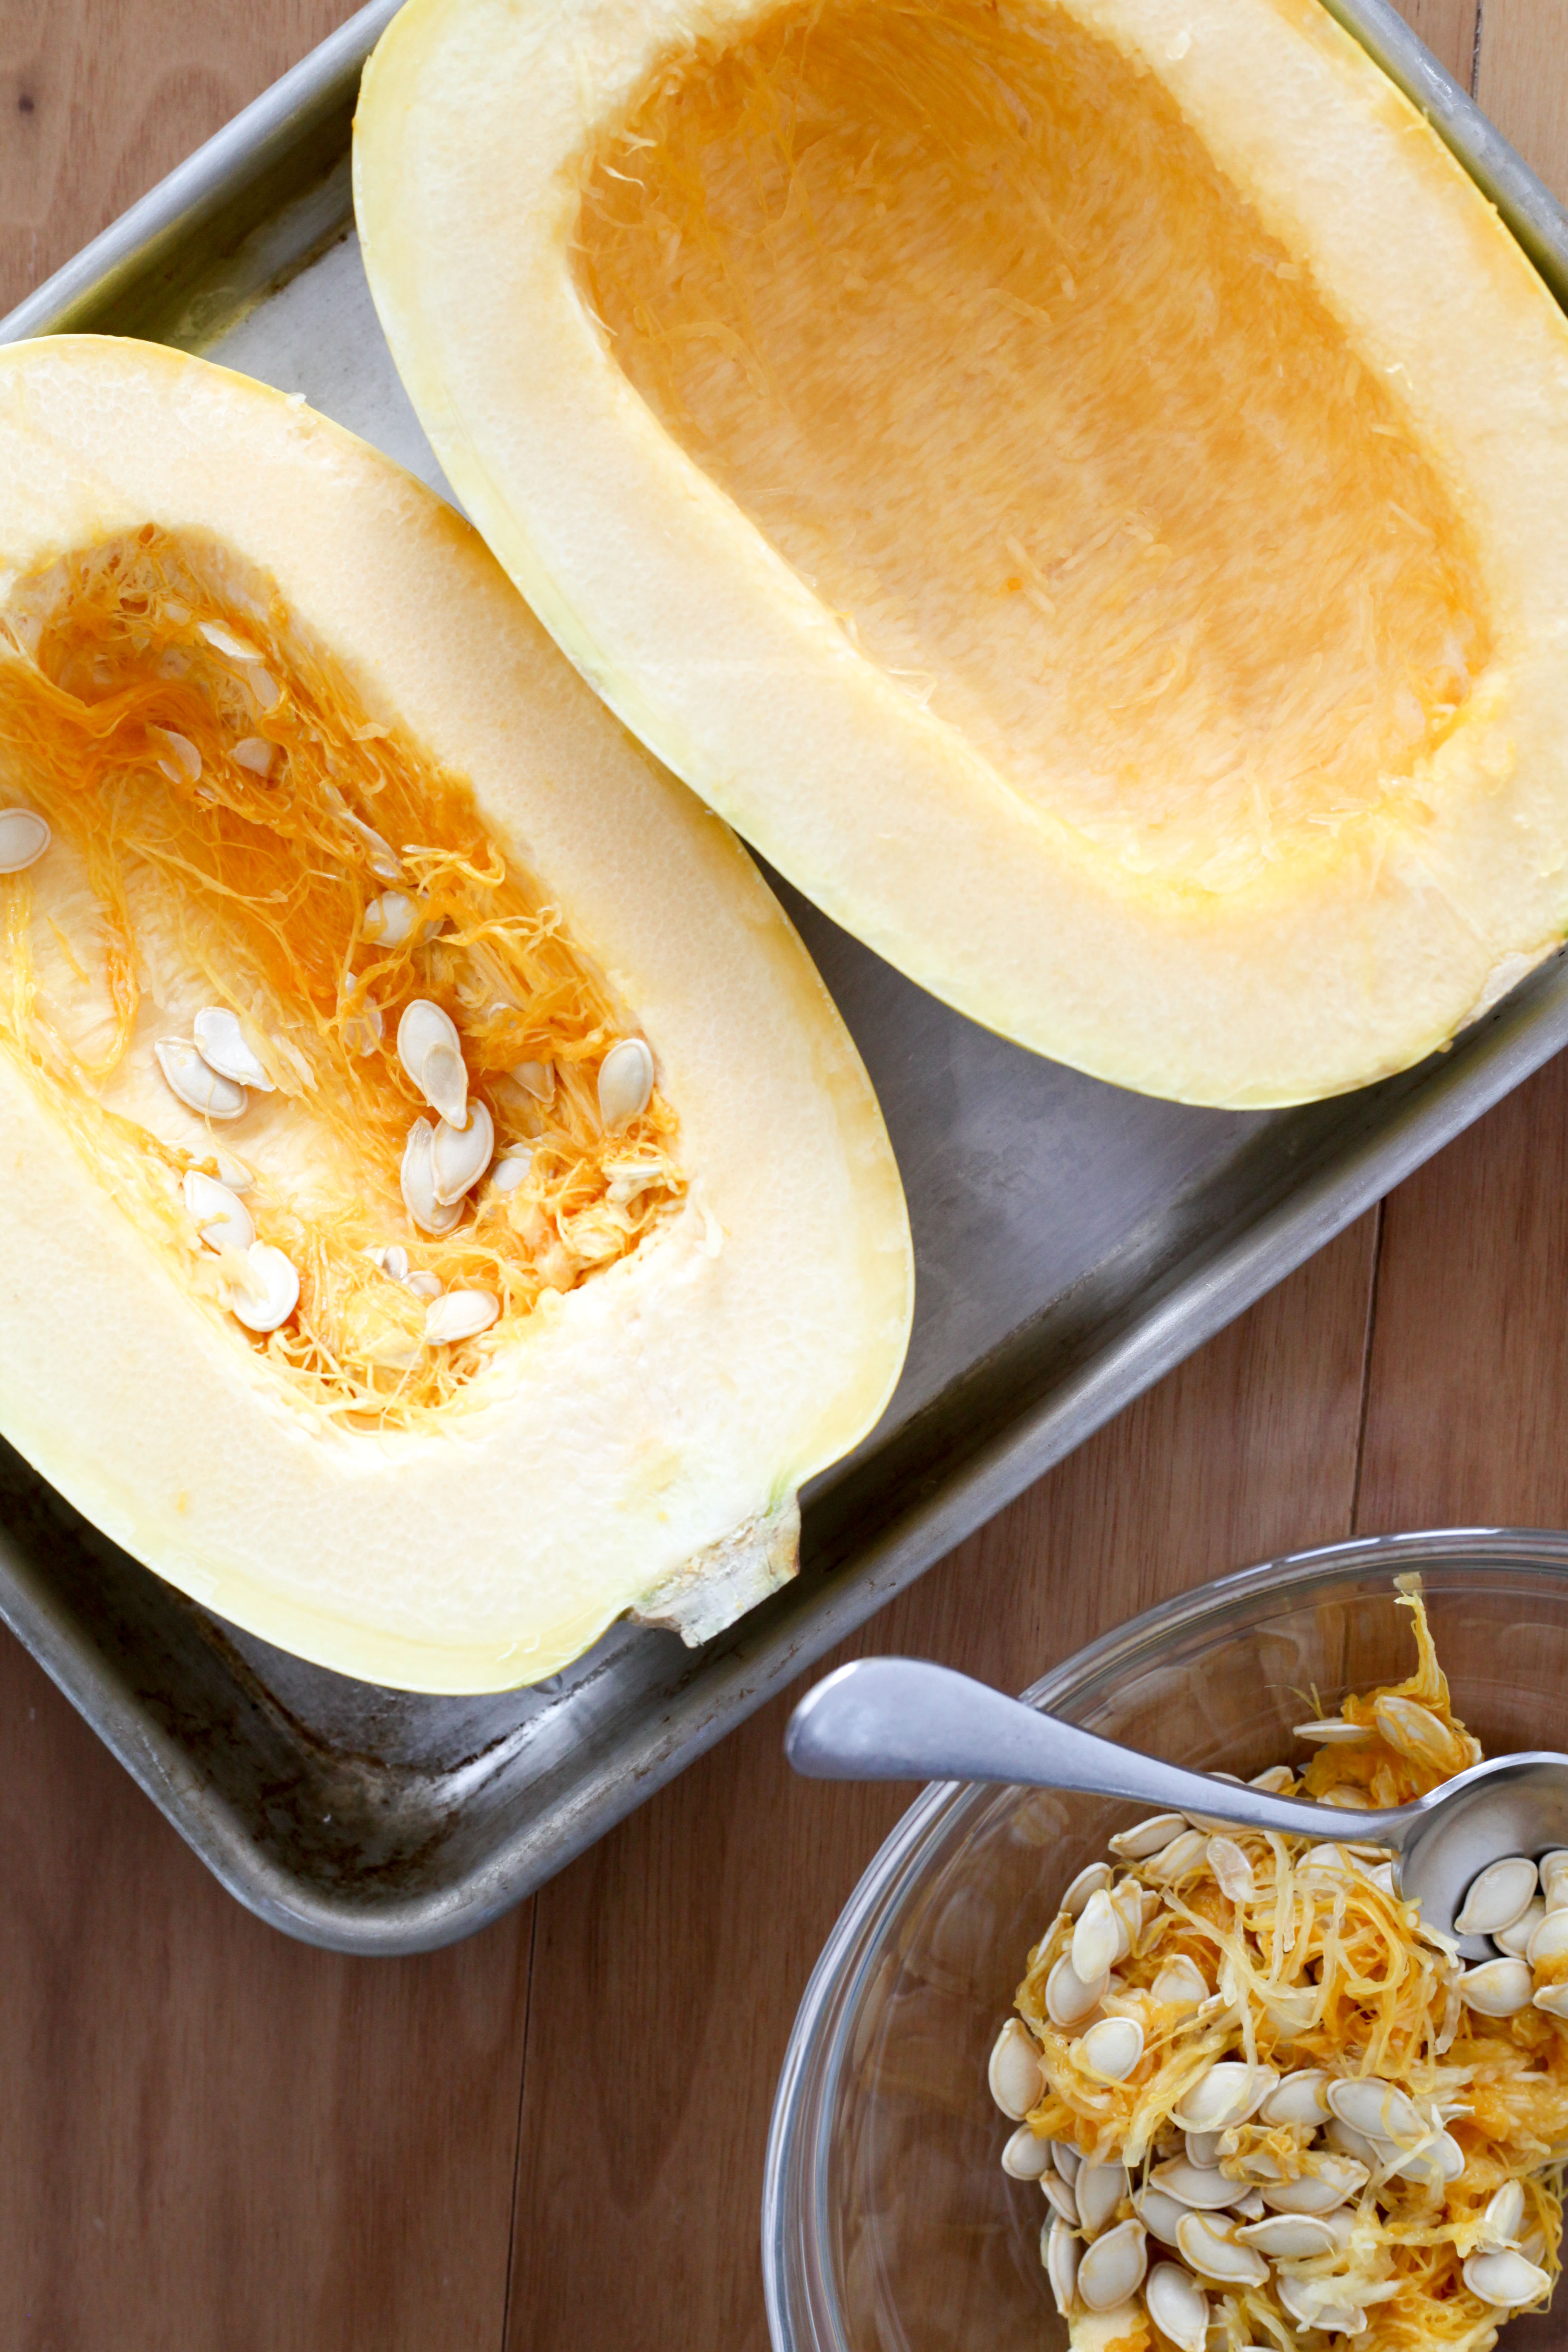 Scooping out the spaghetti squash